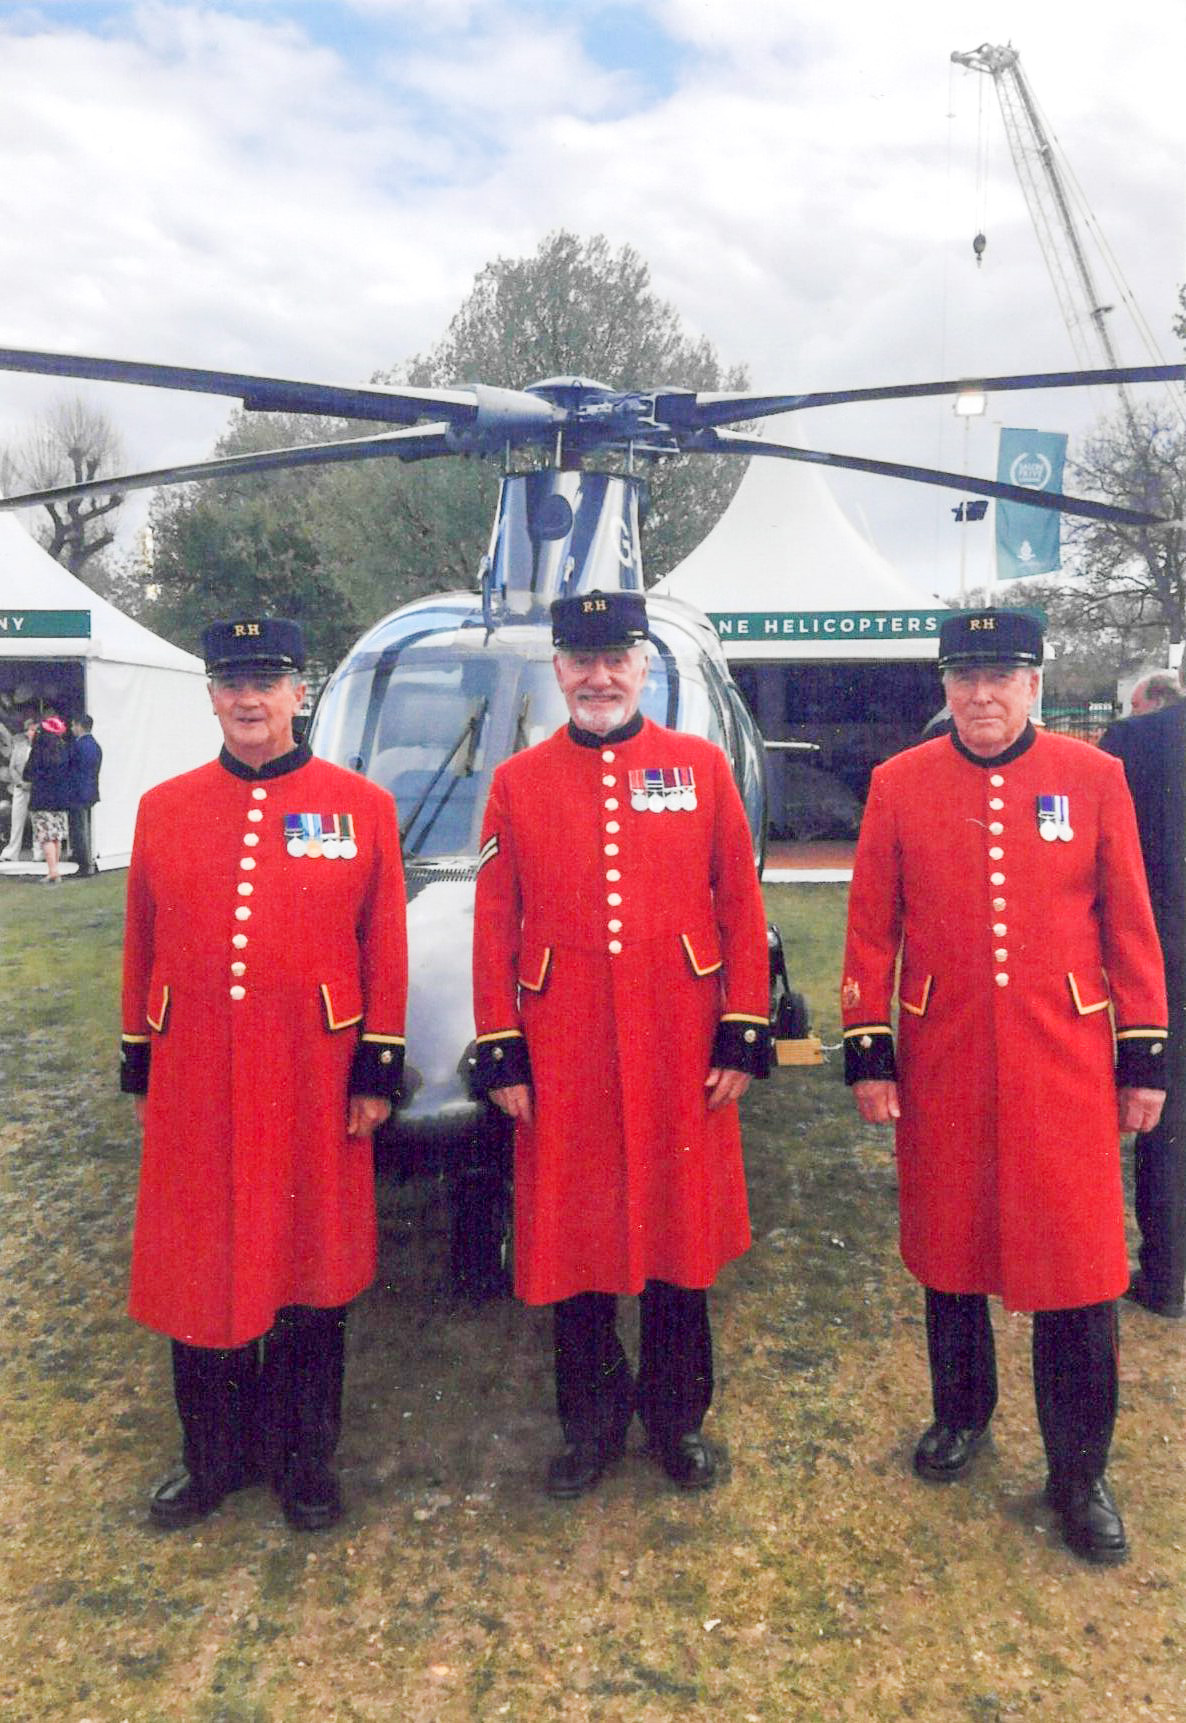 Mike Simmonds as a Chelsea Pensioner